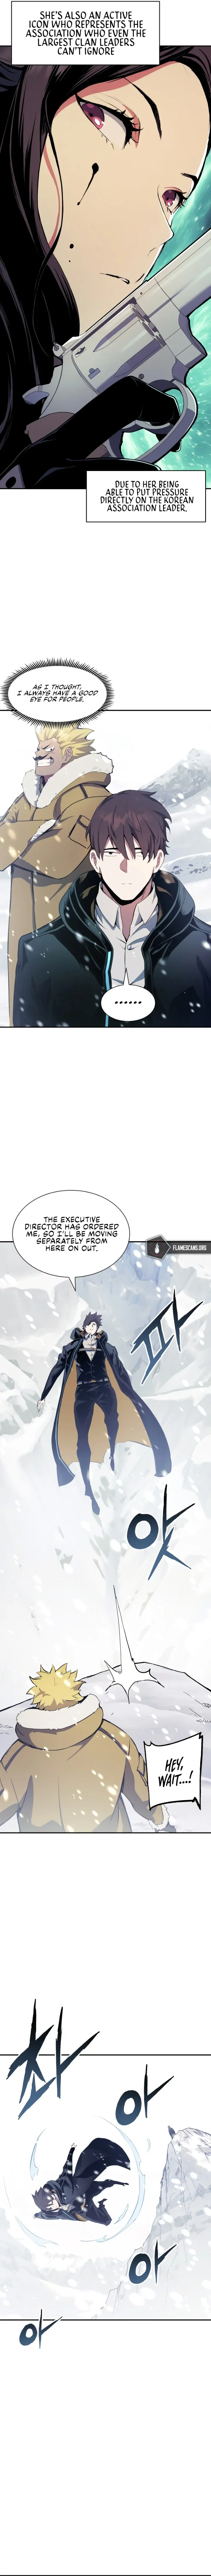 return-of-the-shattered-constellation-chap-69-4